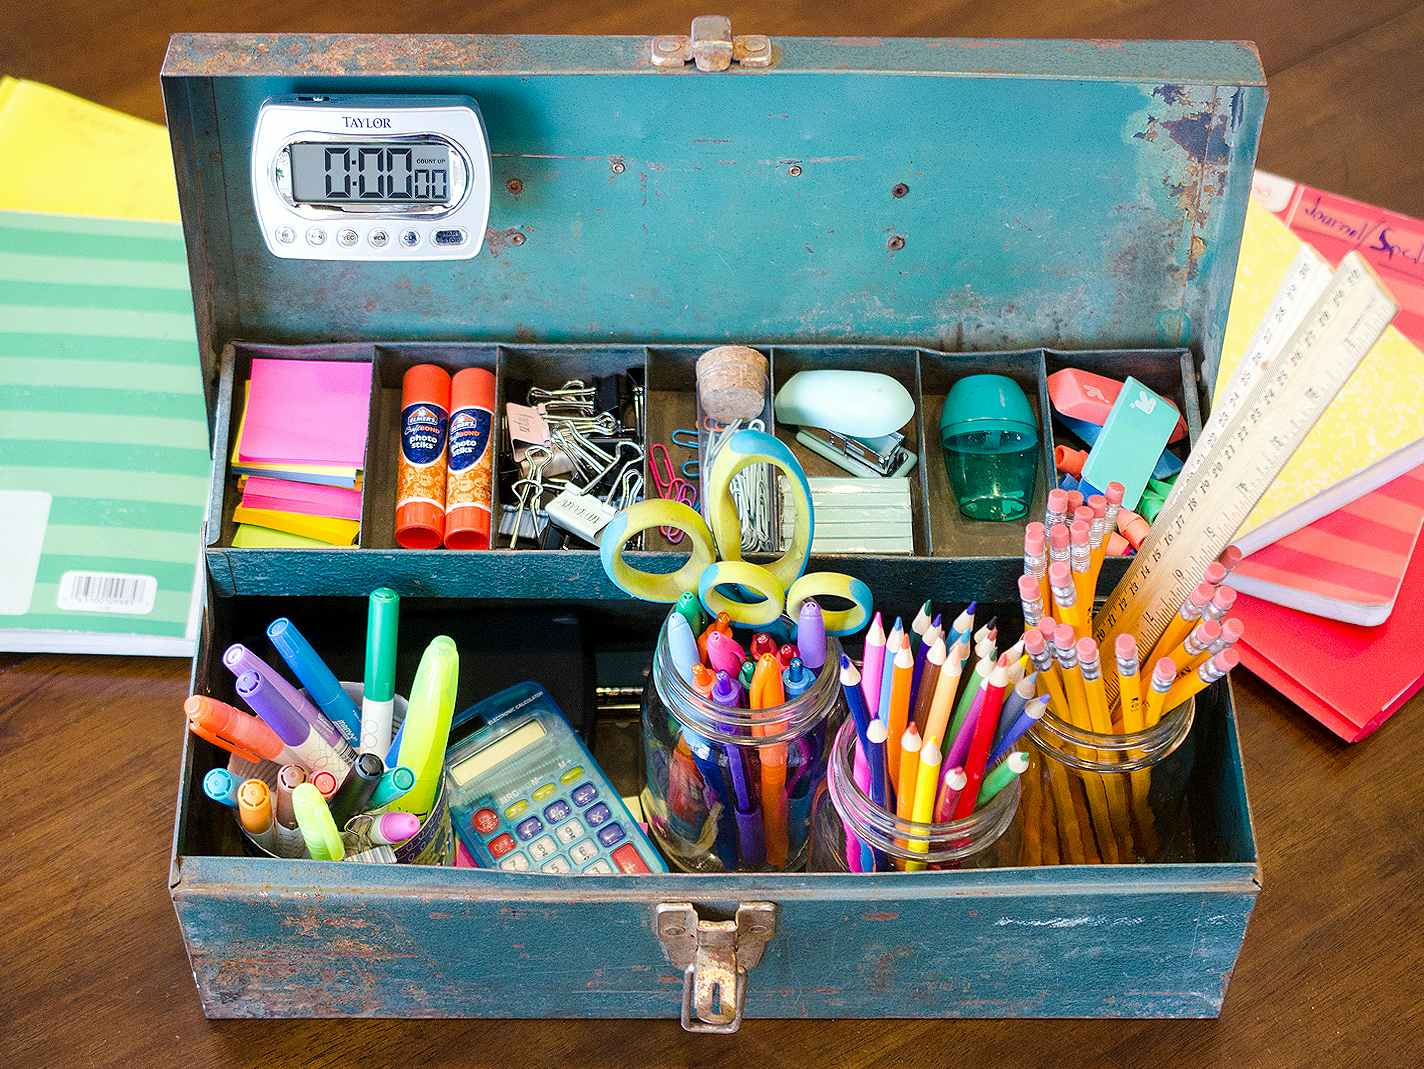 A toolbox full of school supplies sitting on a table in front of some notebooks.